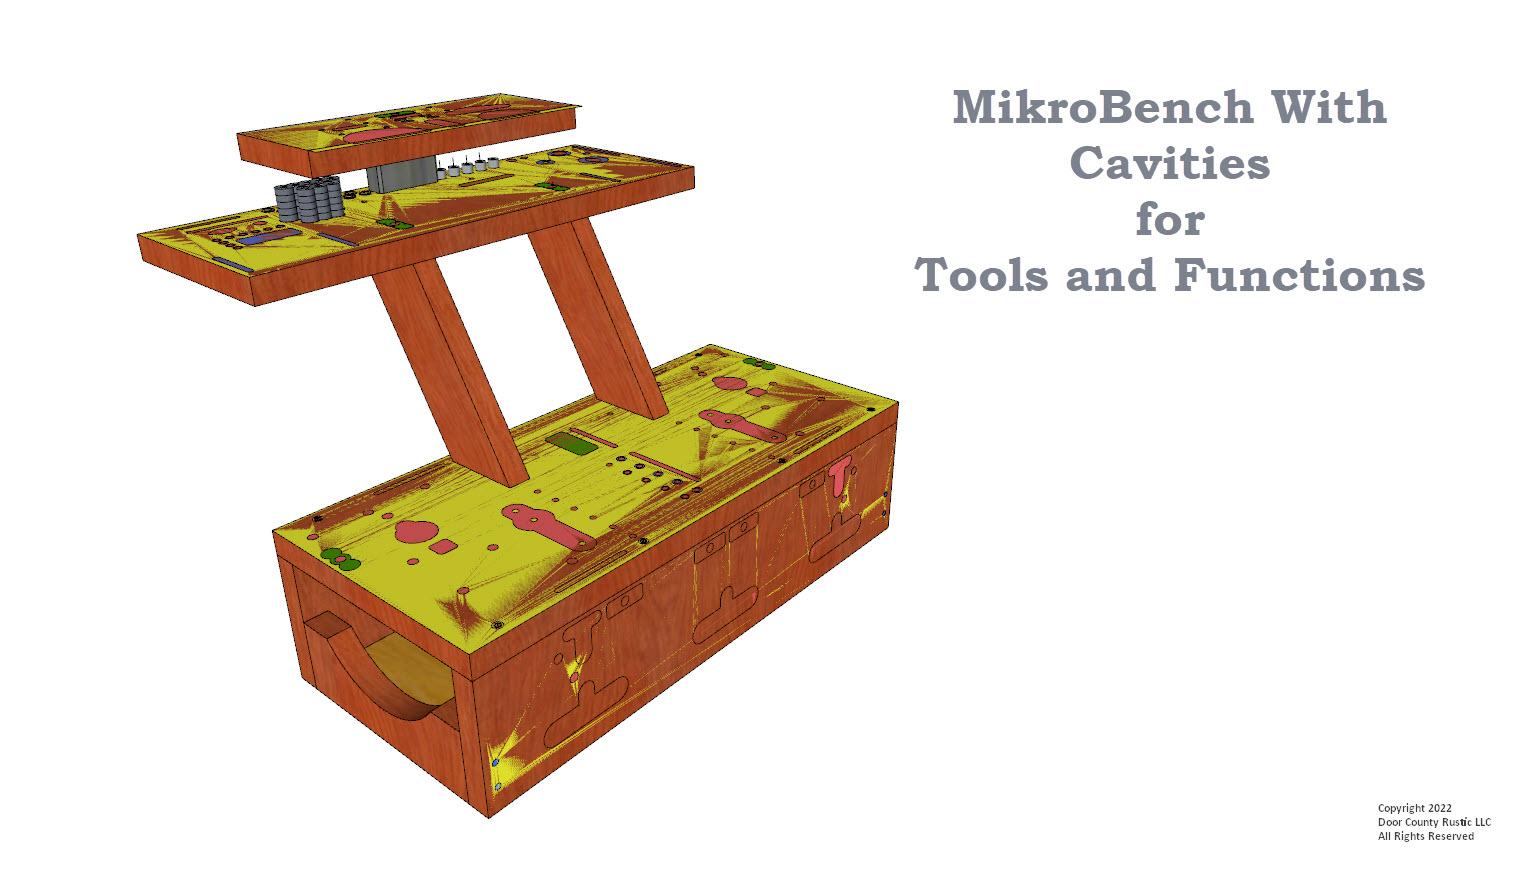 MikroBench With Cavities for Tools and Functions.jpg